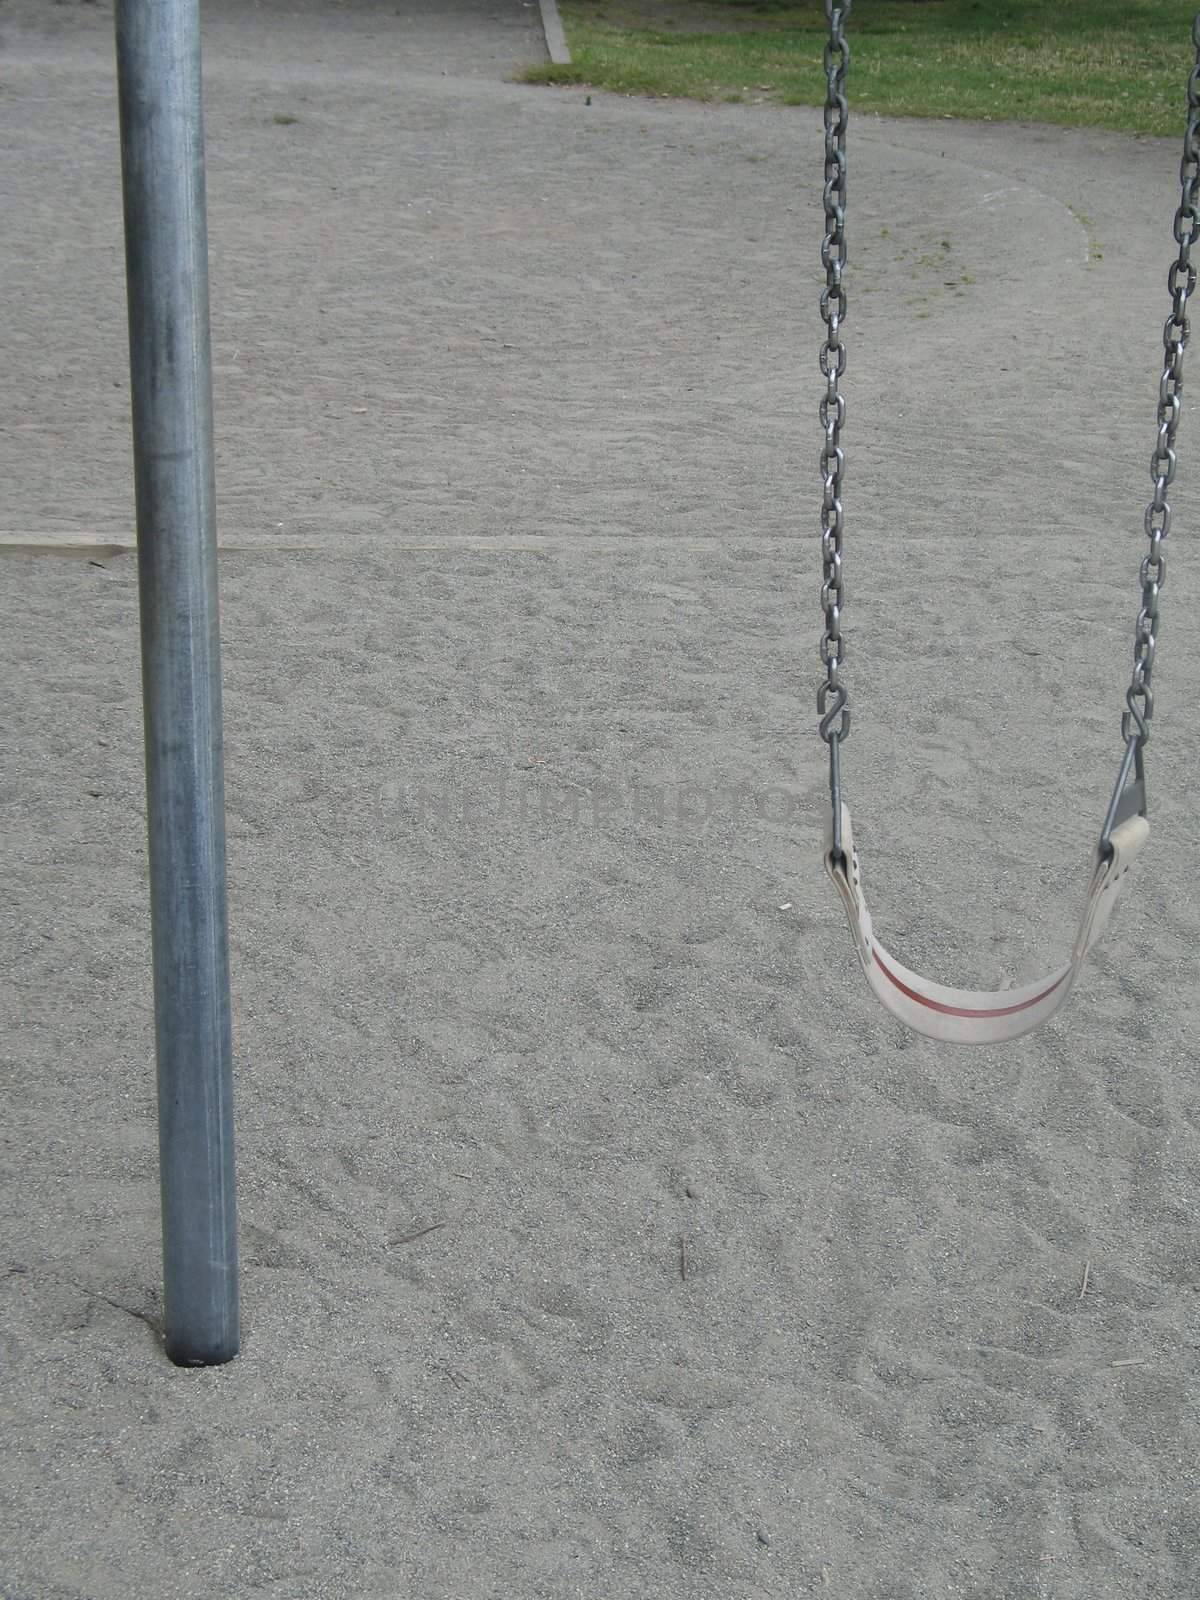 swing in a playground